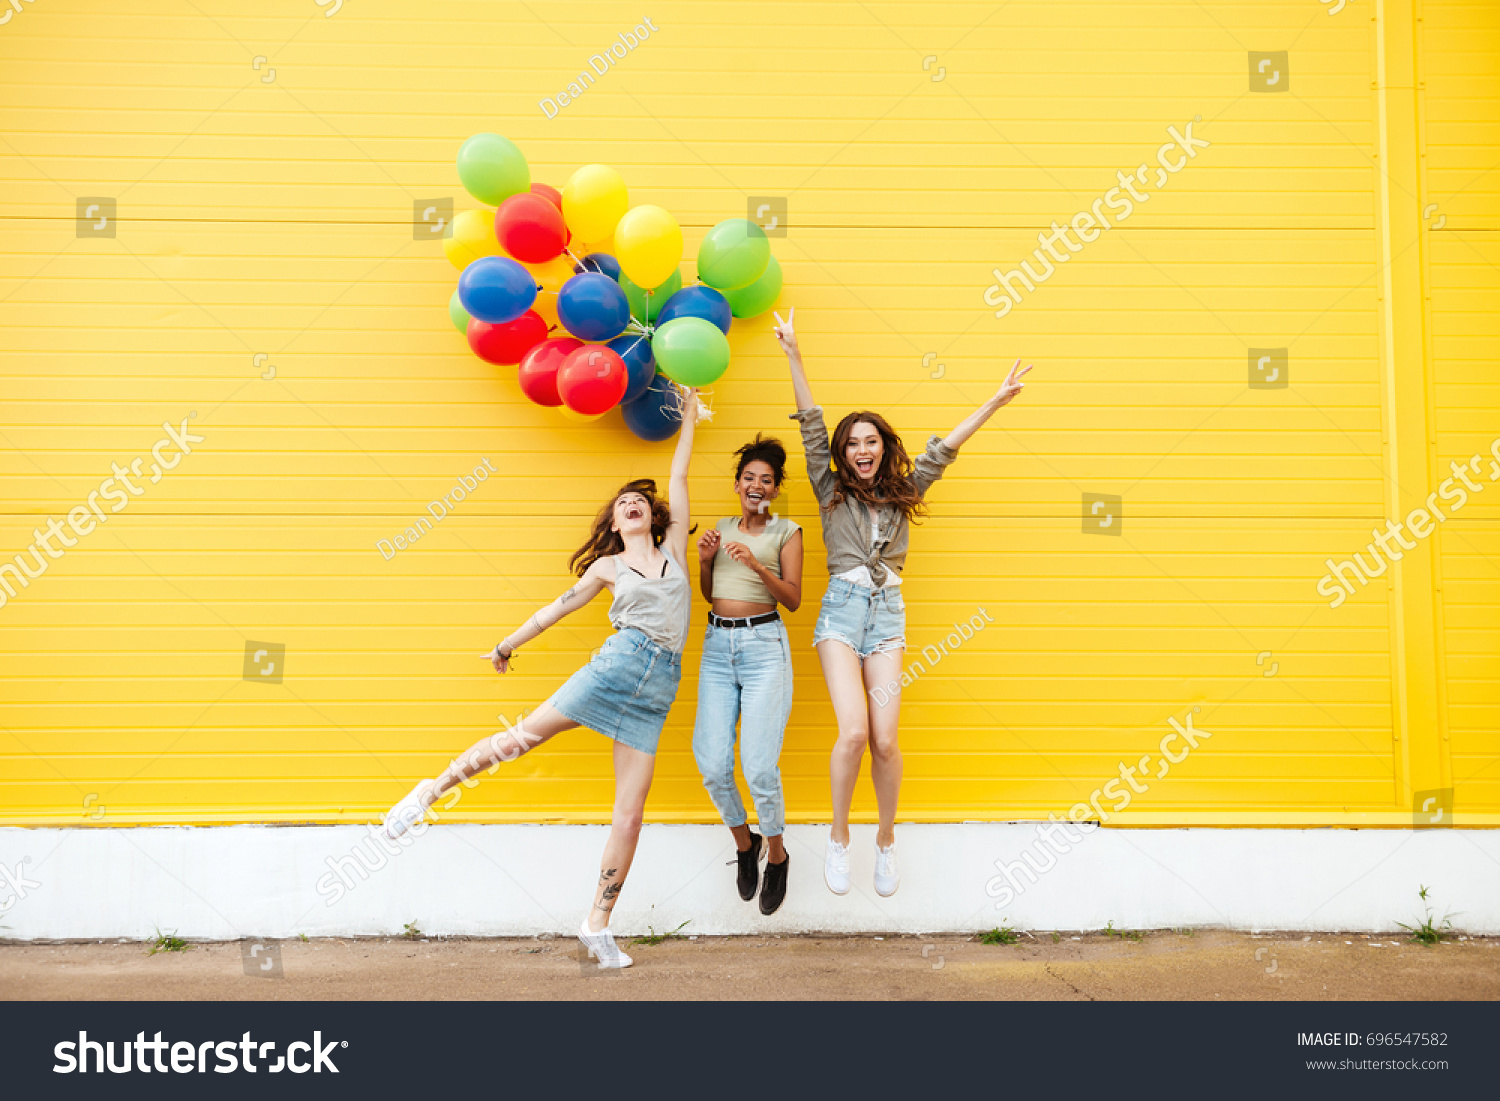 Picture of young happy women friends standing over yellow wall. Have fun with balloons. #696547582